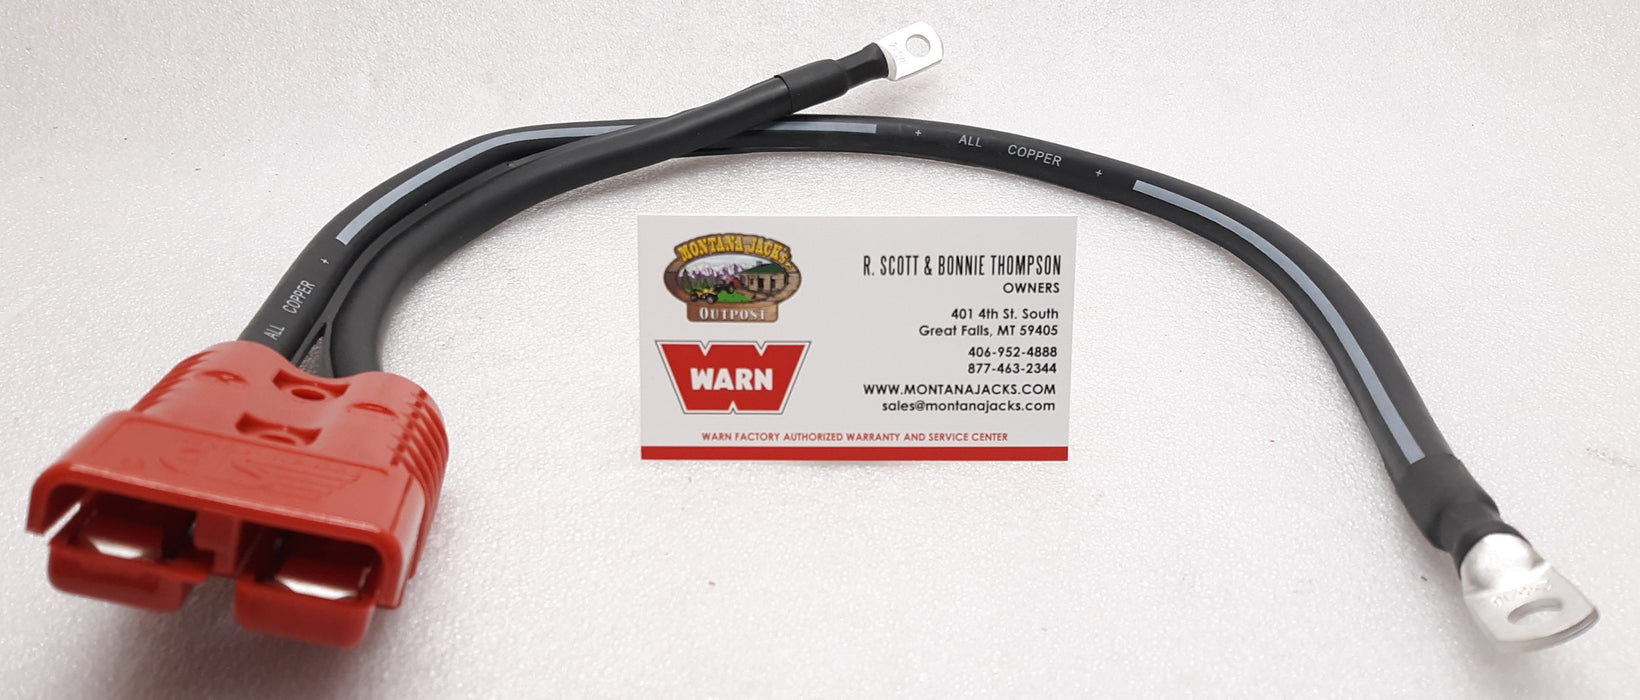 WARN 36080 Quick Connect Power Cable 28" 2 gauge, for connection to Winch